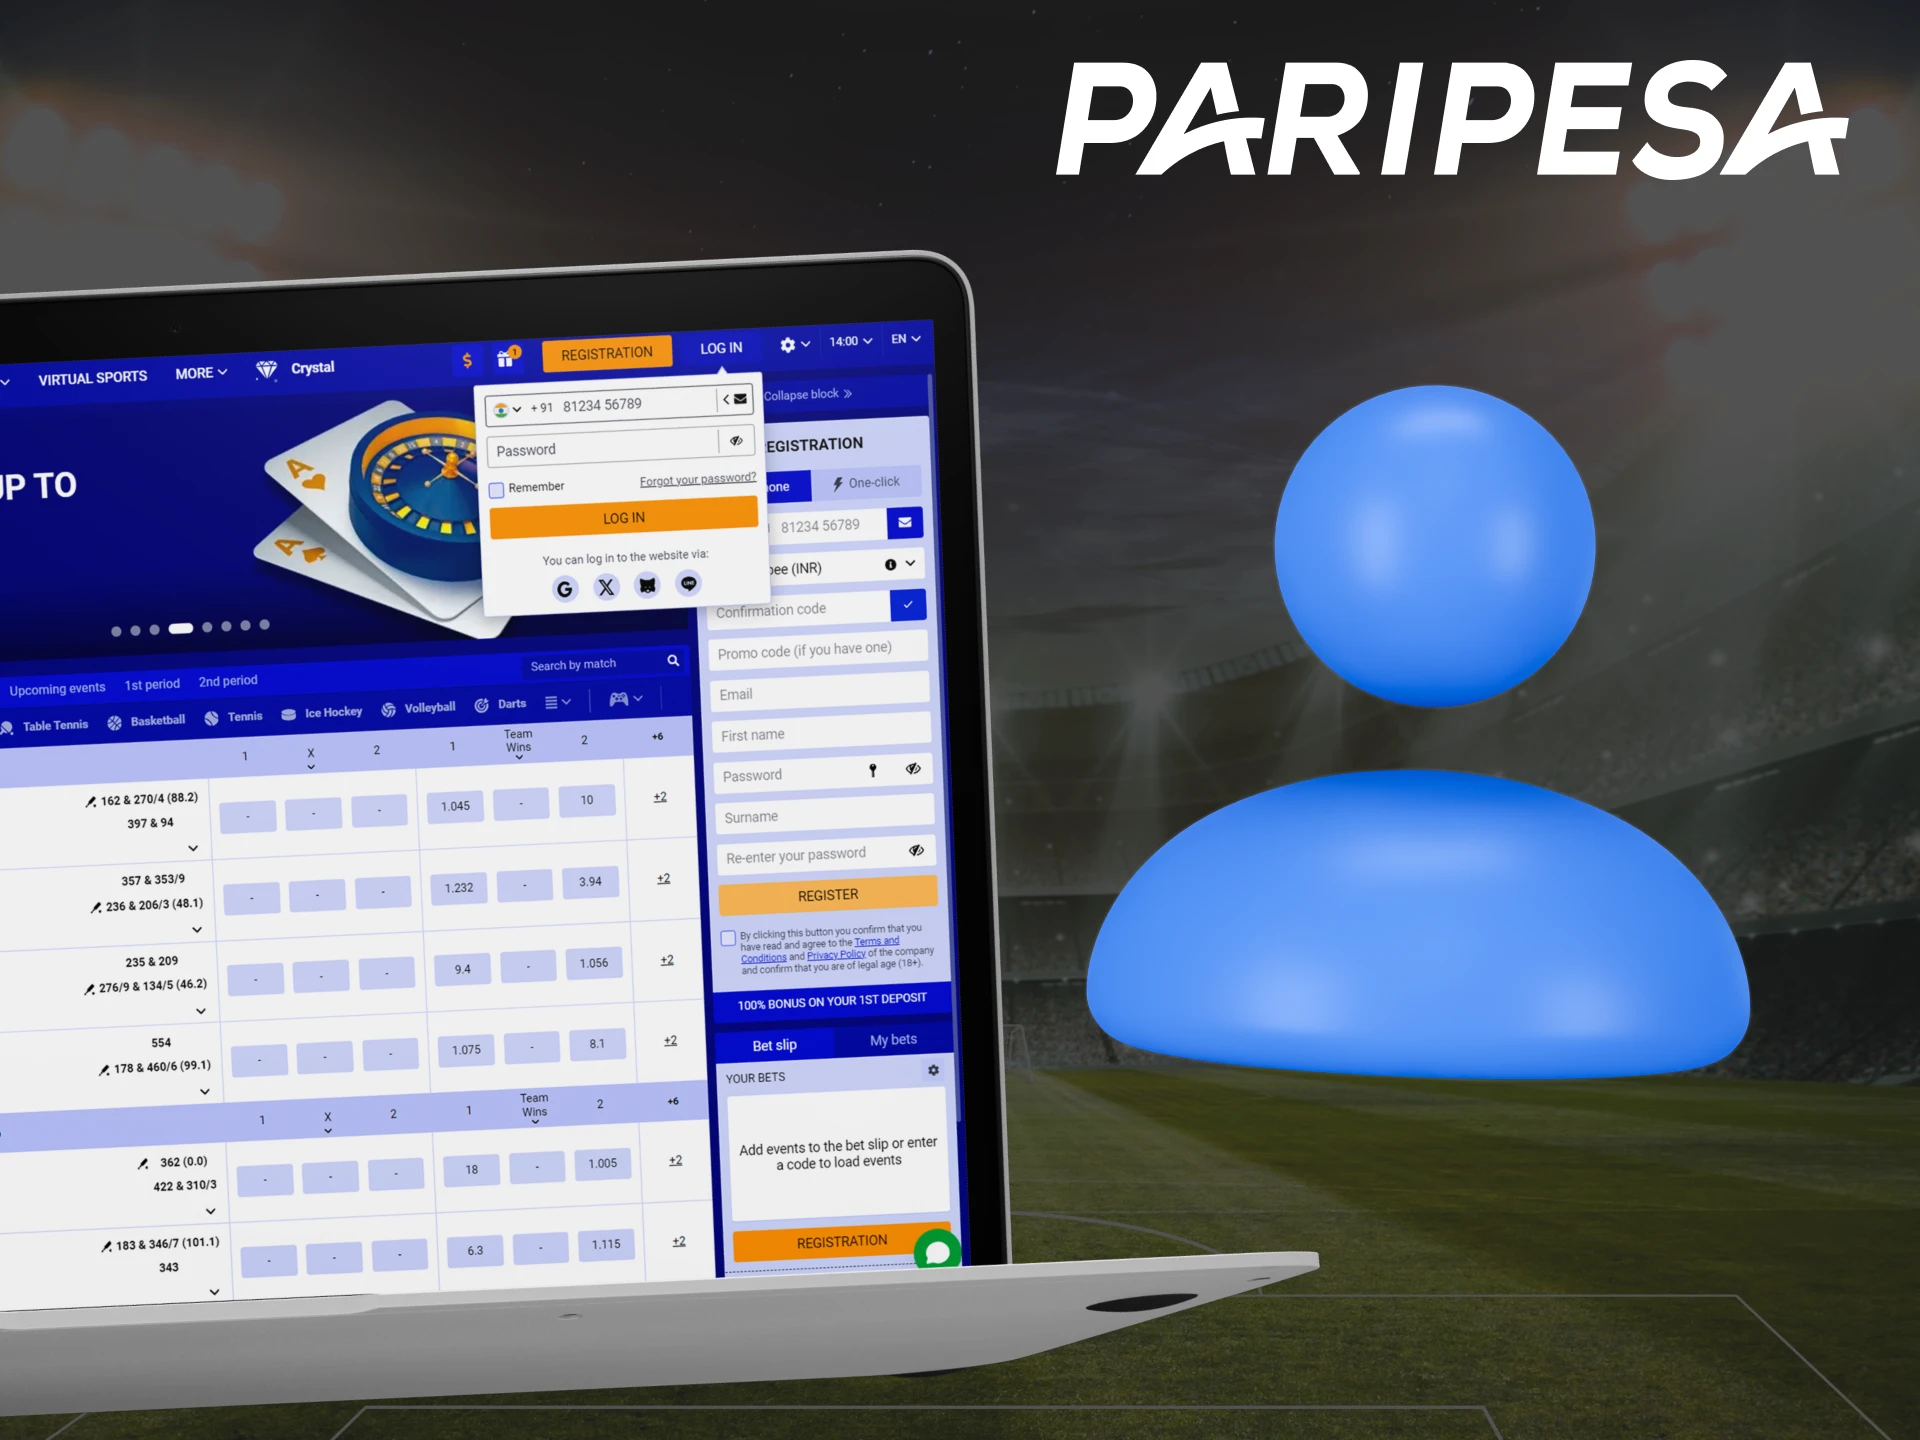 To start betting on Peripesa, log into your account.